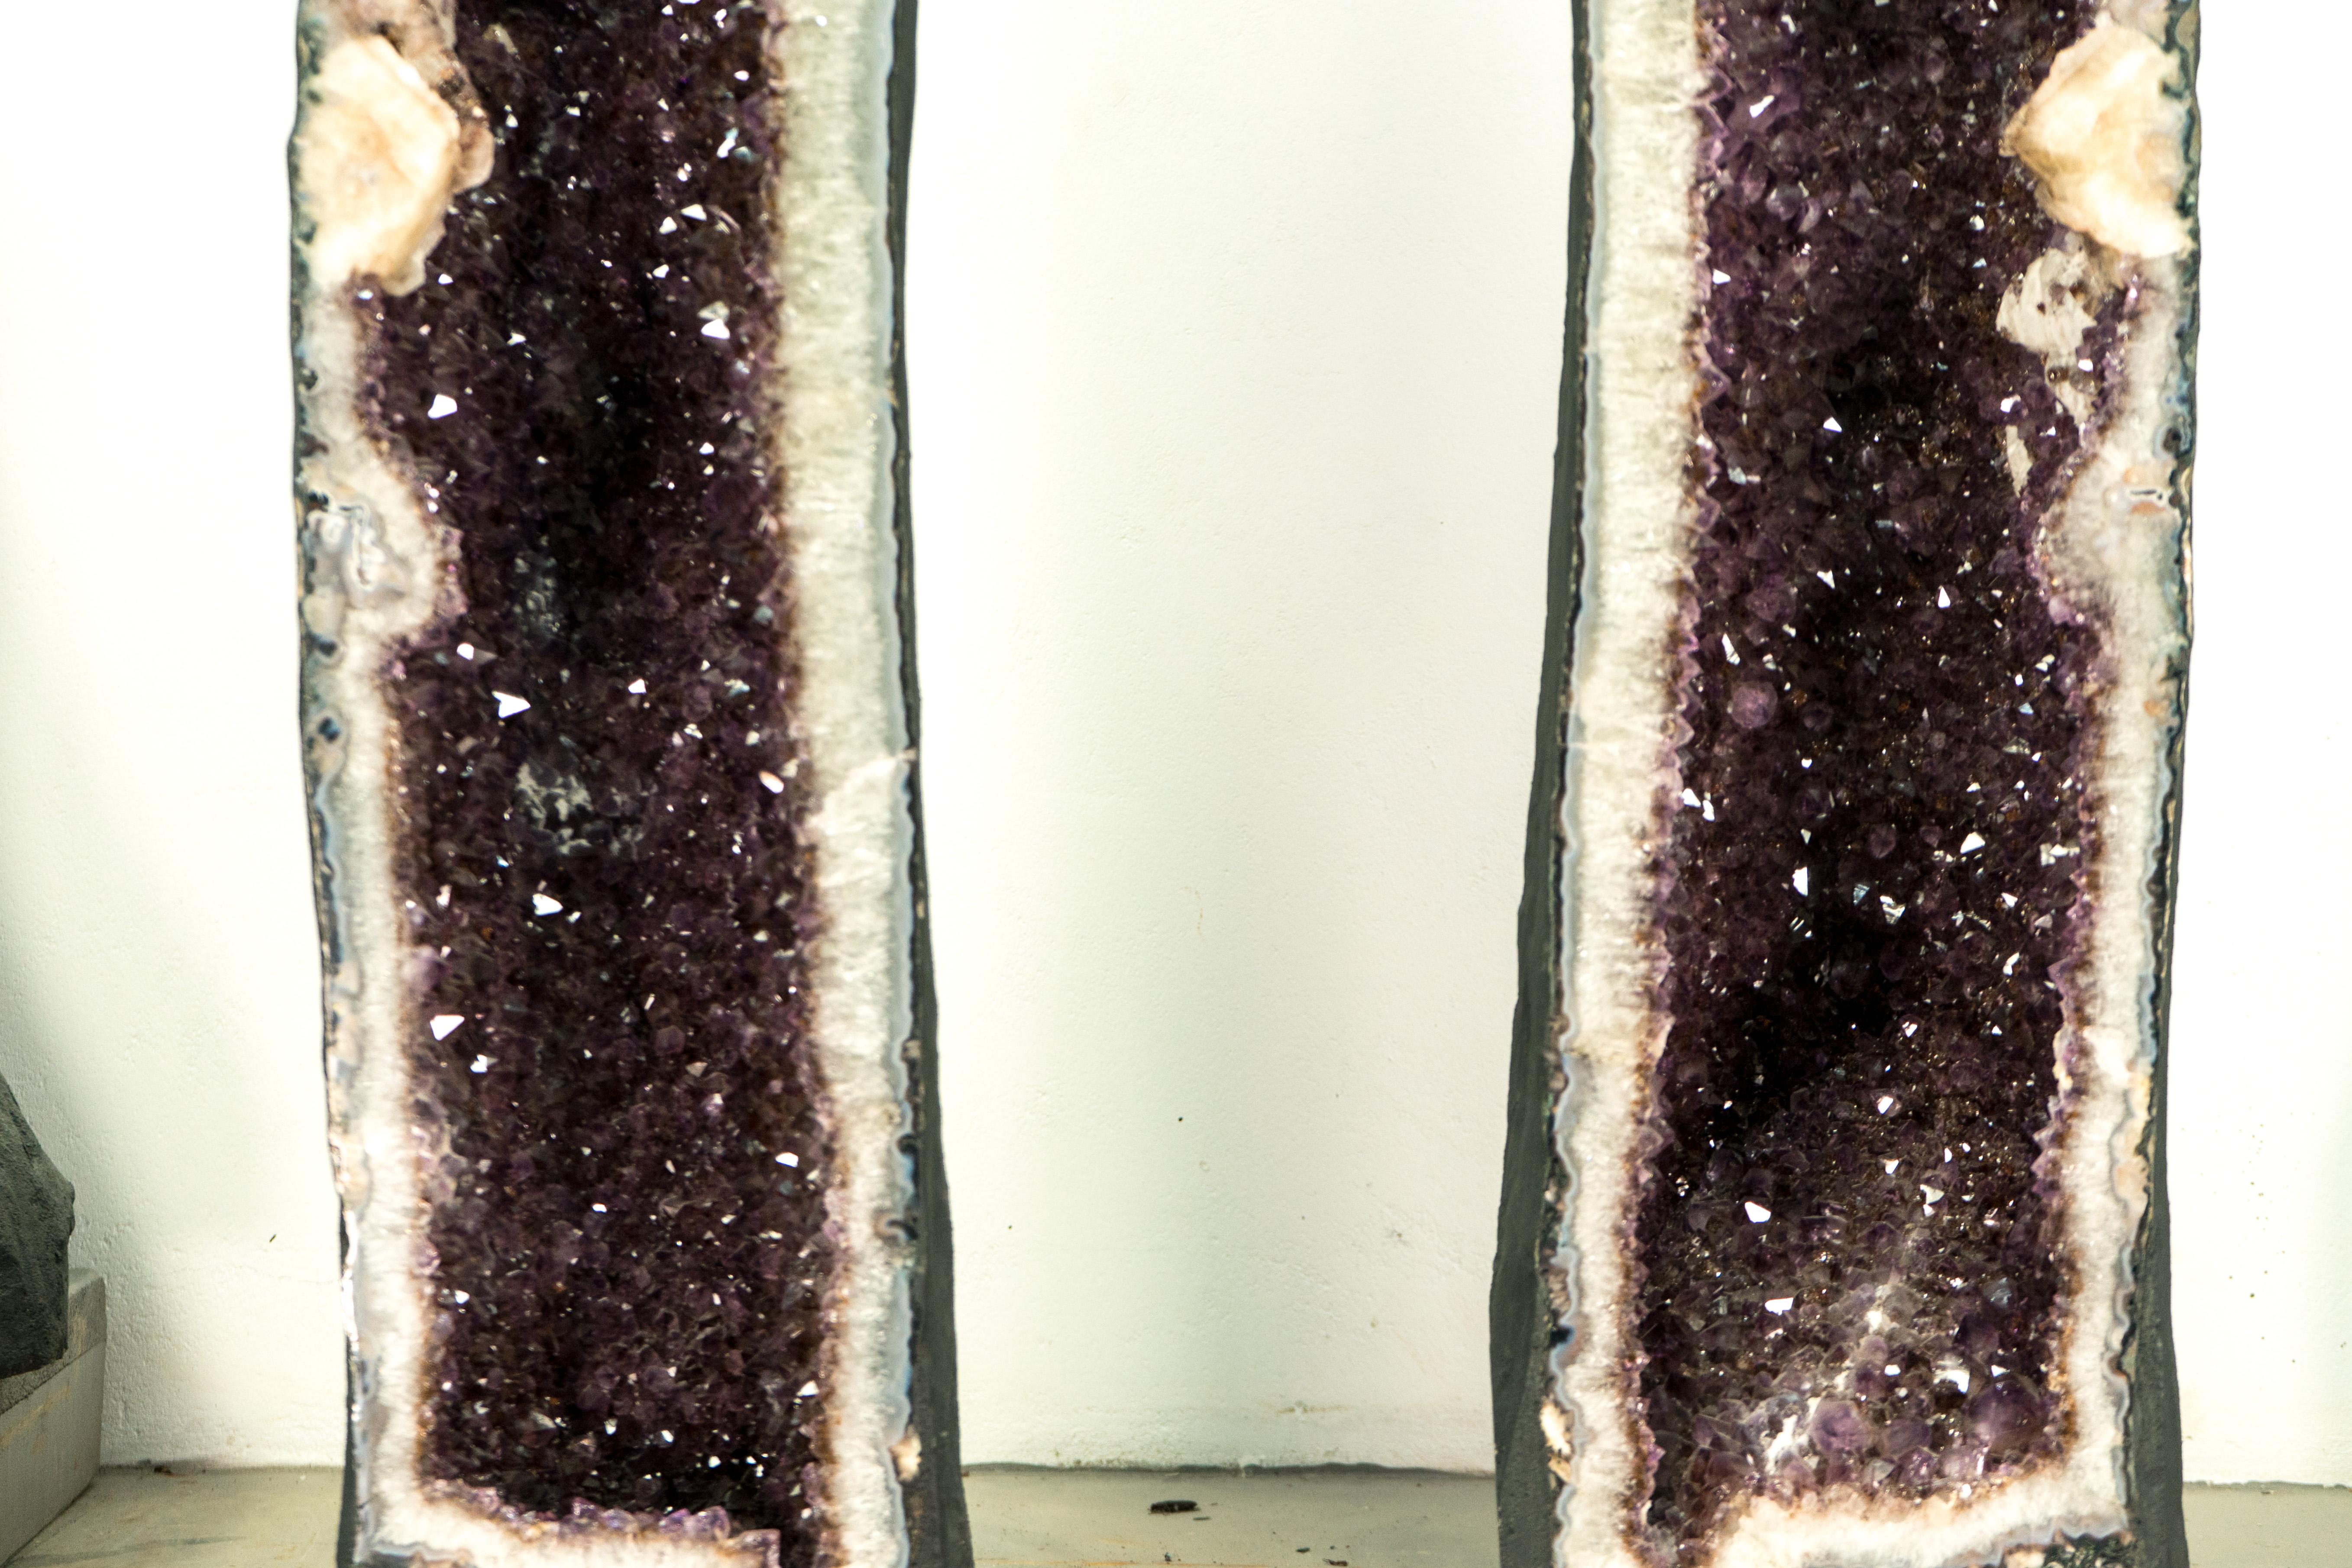 Brazilian Pair of 5 Ft Tall Large Amethyst Geode Cathedrals with Sparkly Lavender Amethyst For Sale